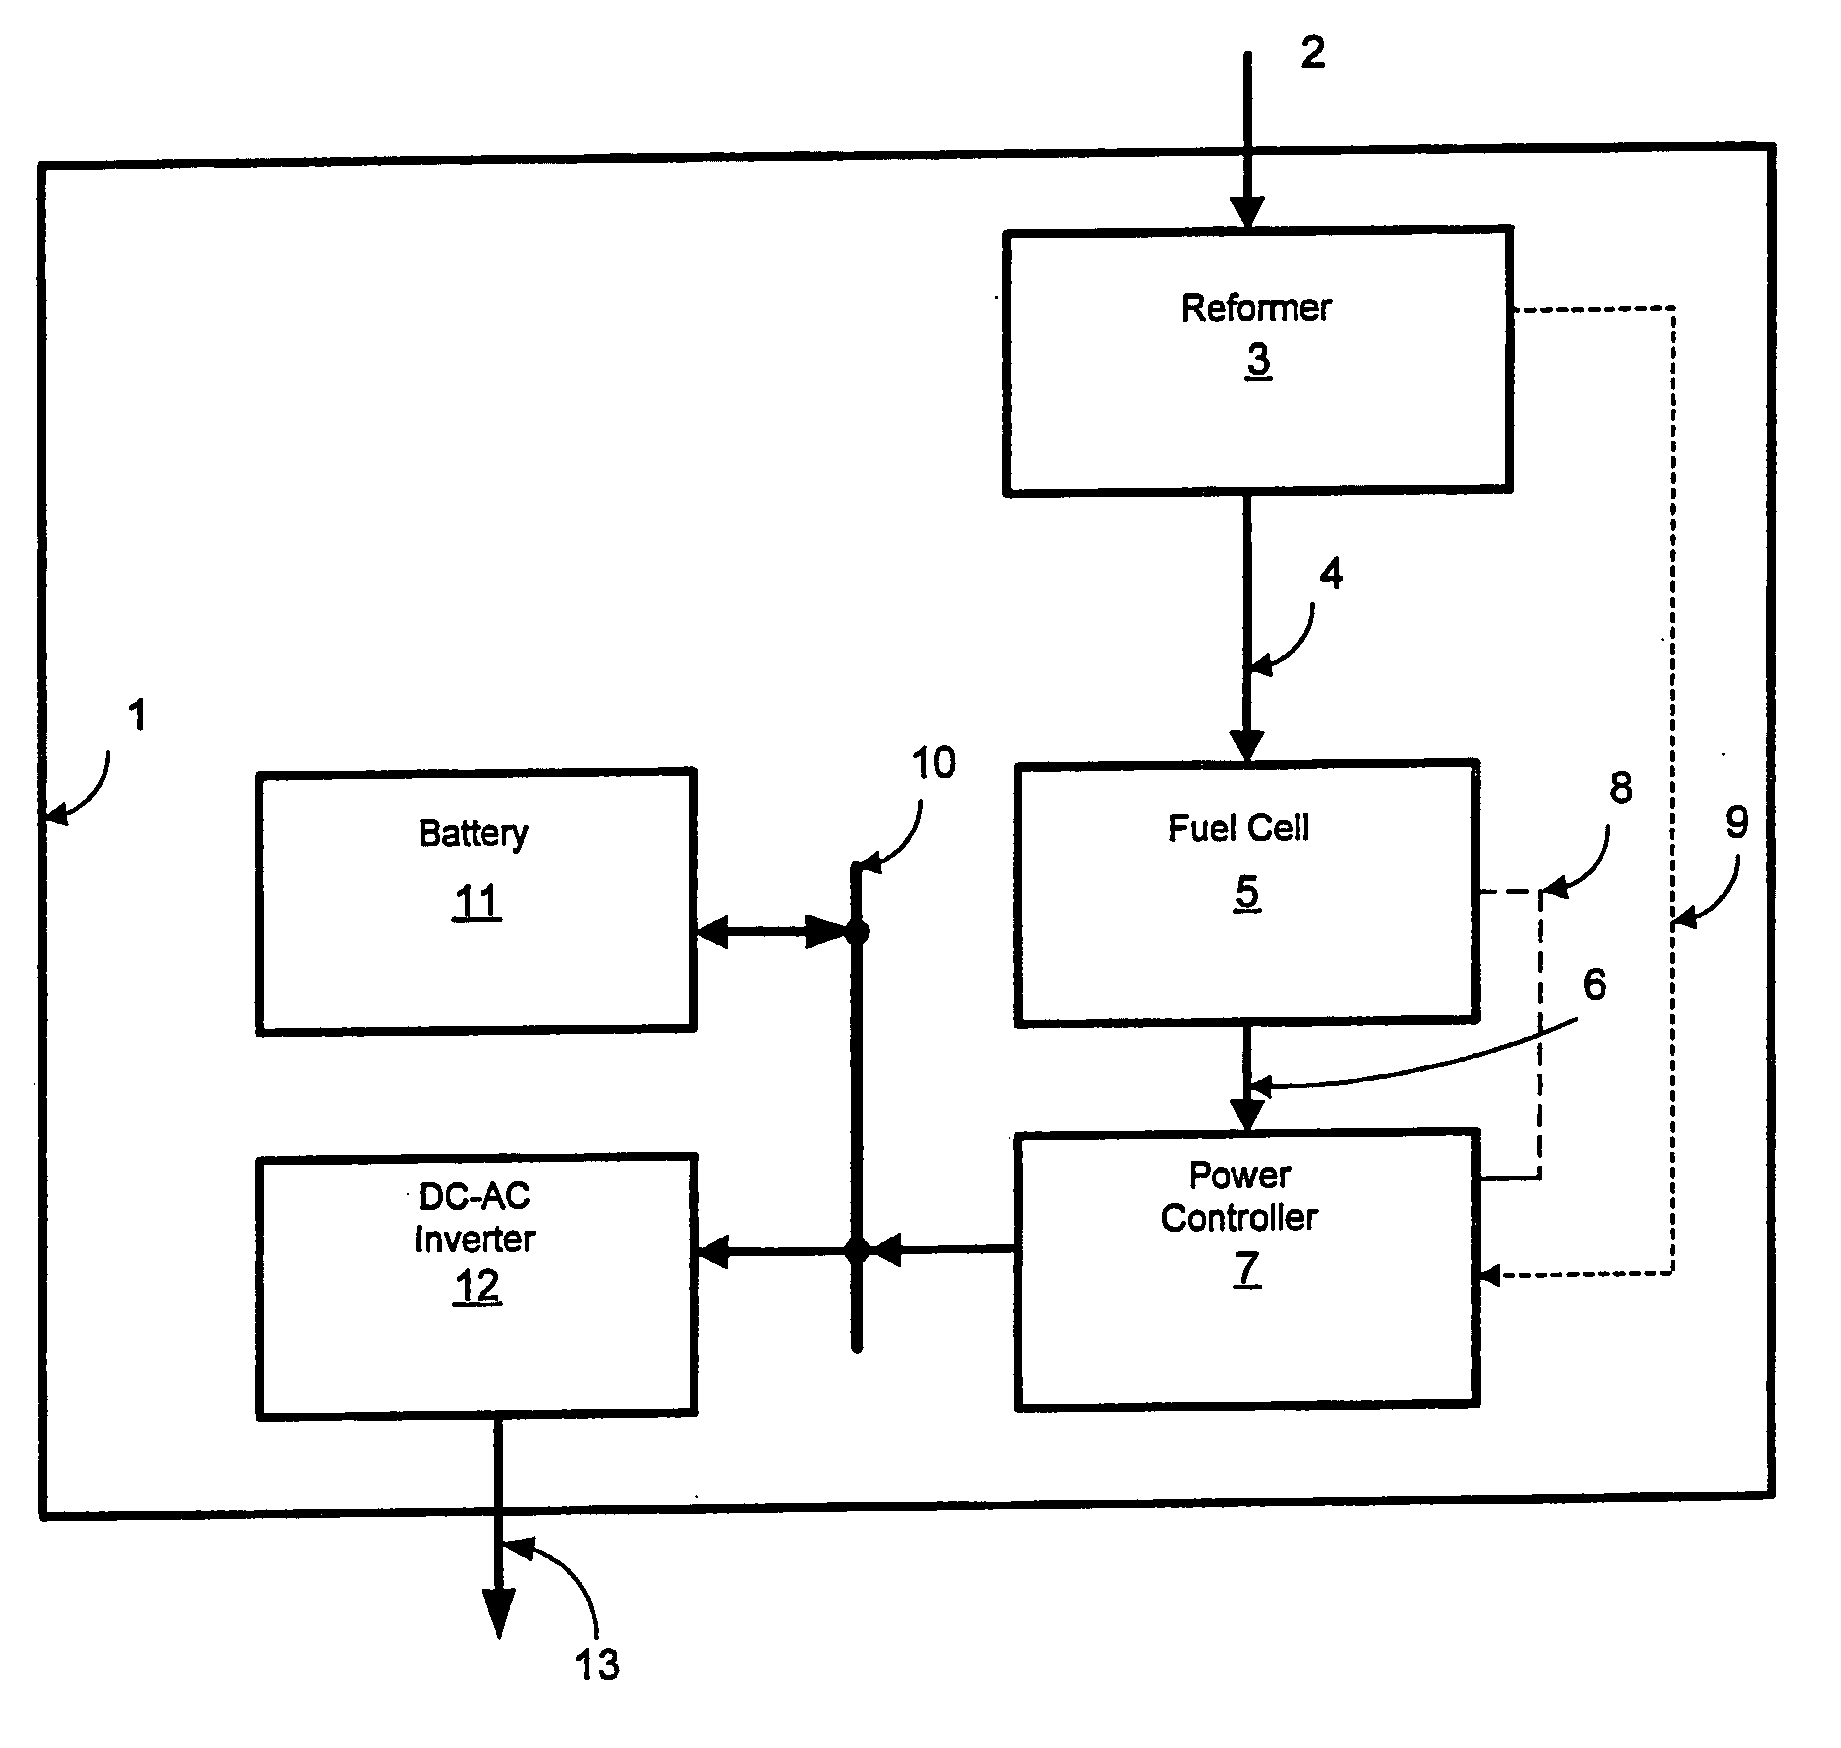 Power controller for fuel cell